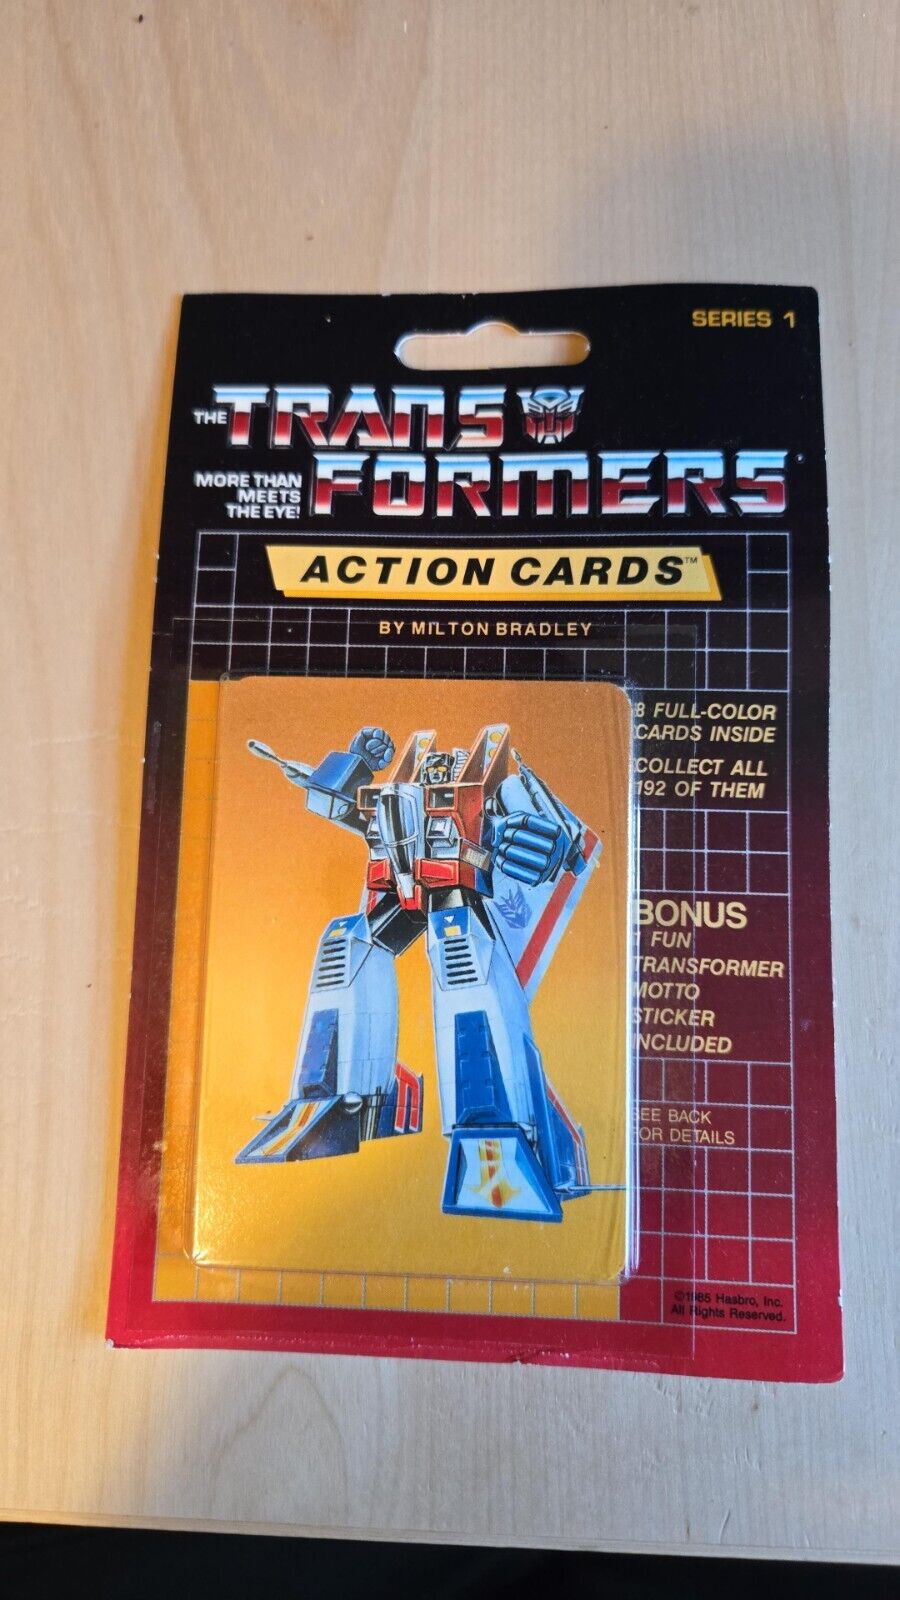 1985 Hasbro Transformers Action Cards Sealed Pack - Starscream on top